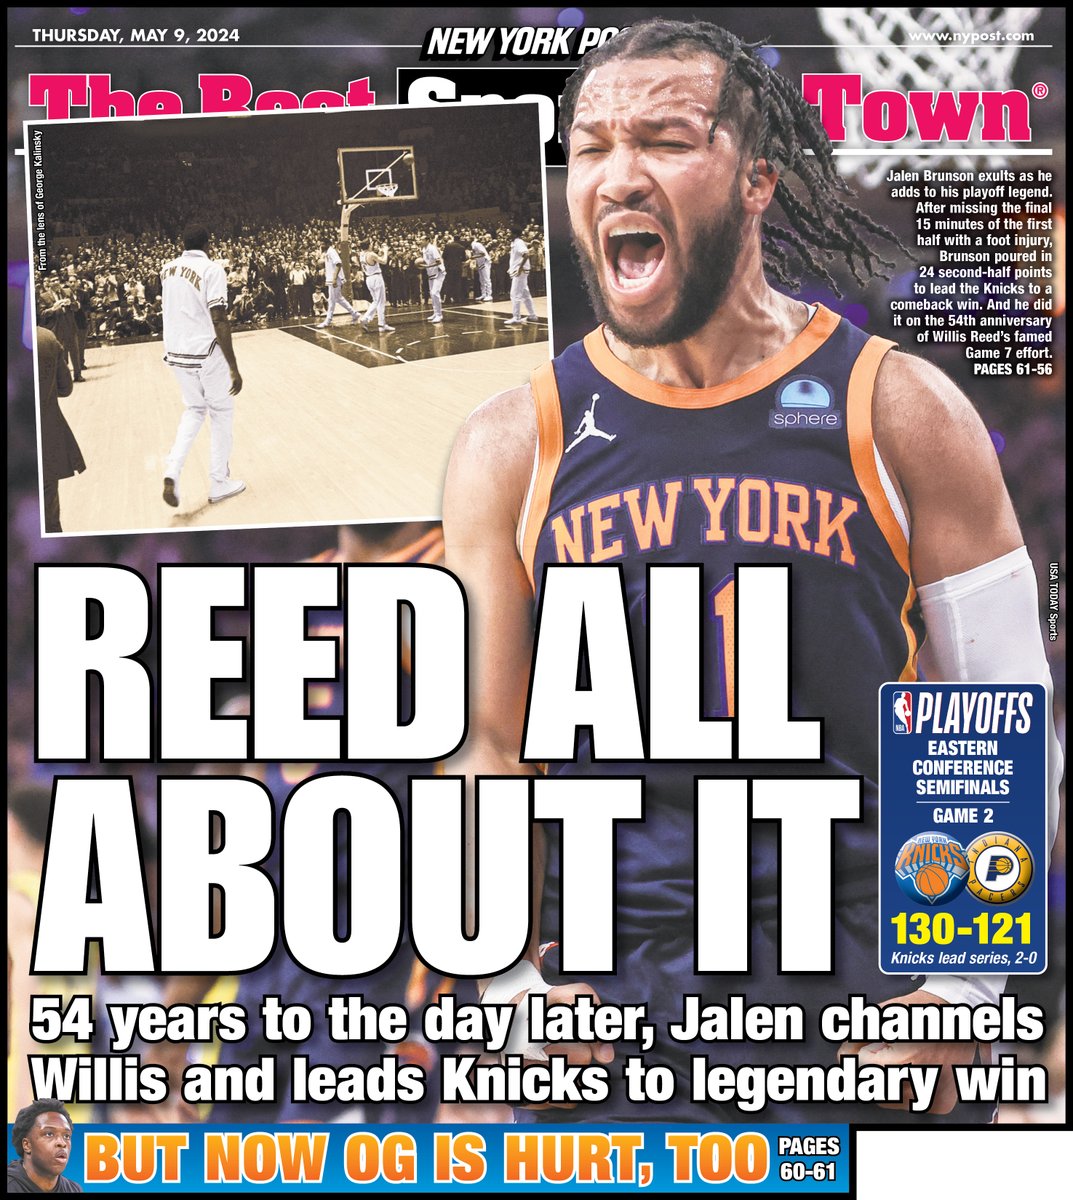 The back page: REED ALL ABOUT IT trib.al/Z99StTH